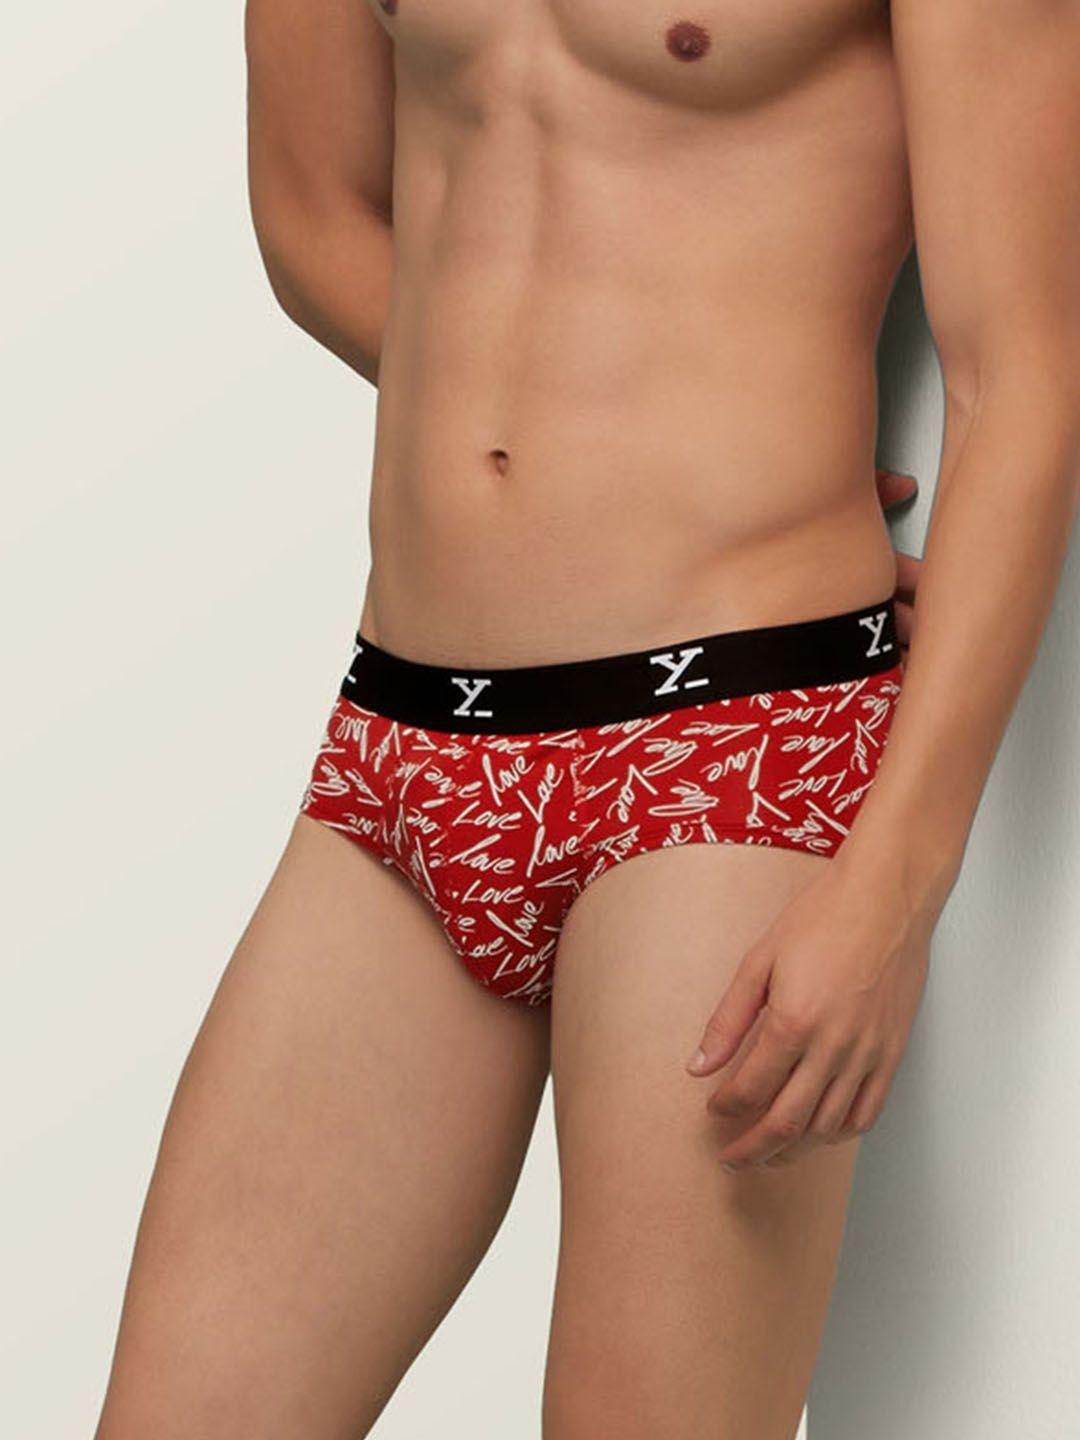 xyxx men red & white printed shuffle intellisoft antimicrobial basic briefs